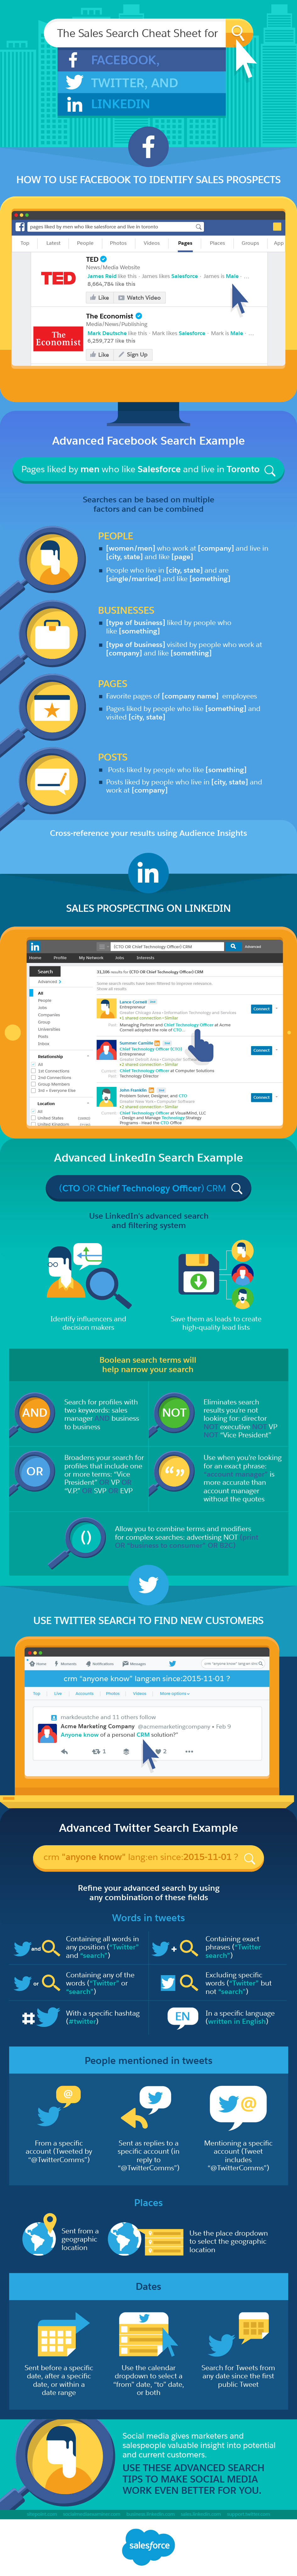 The Sales Search Cheat Sheet for Facebook, Twitter and linkedin